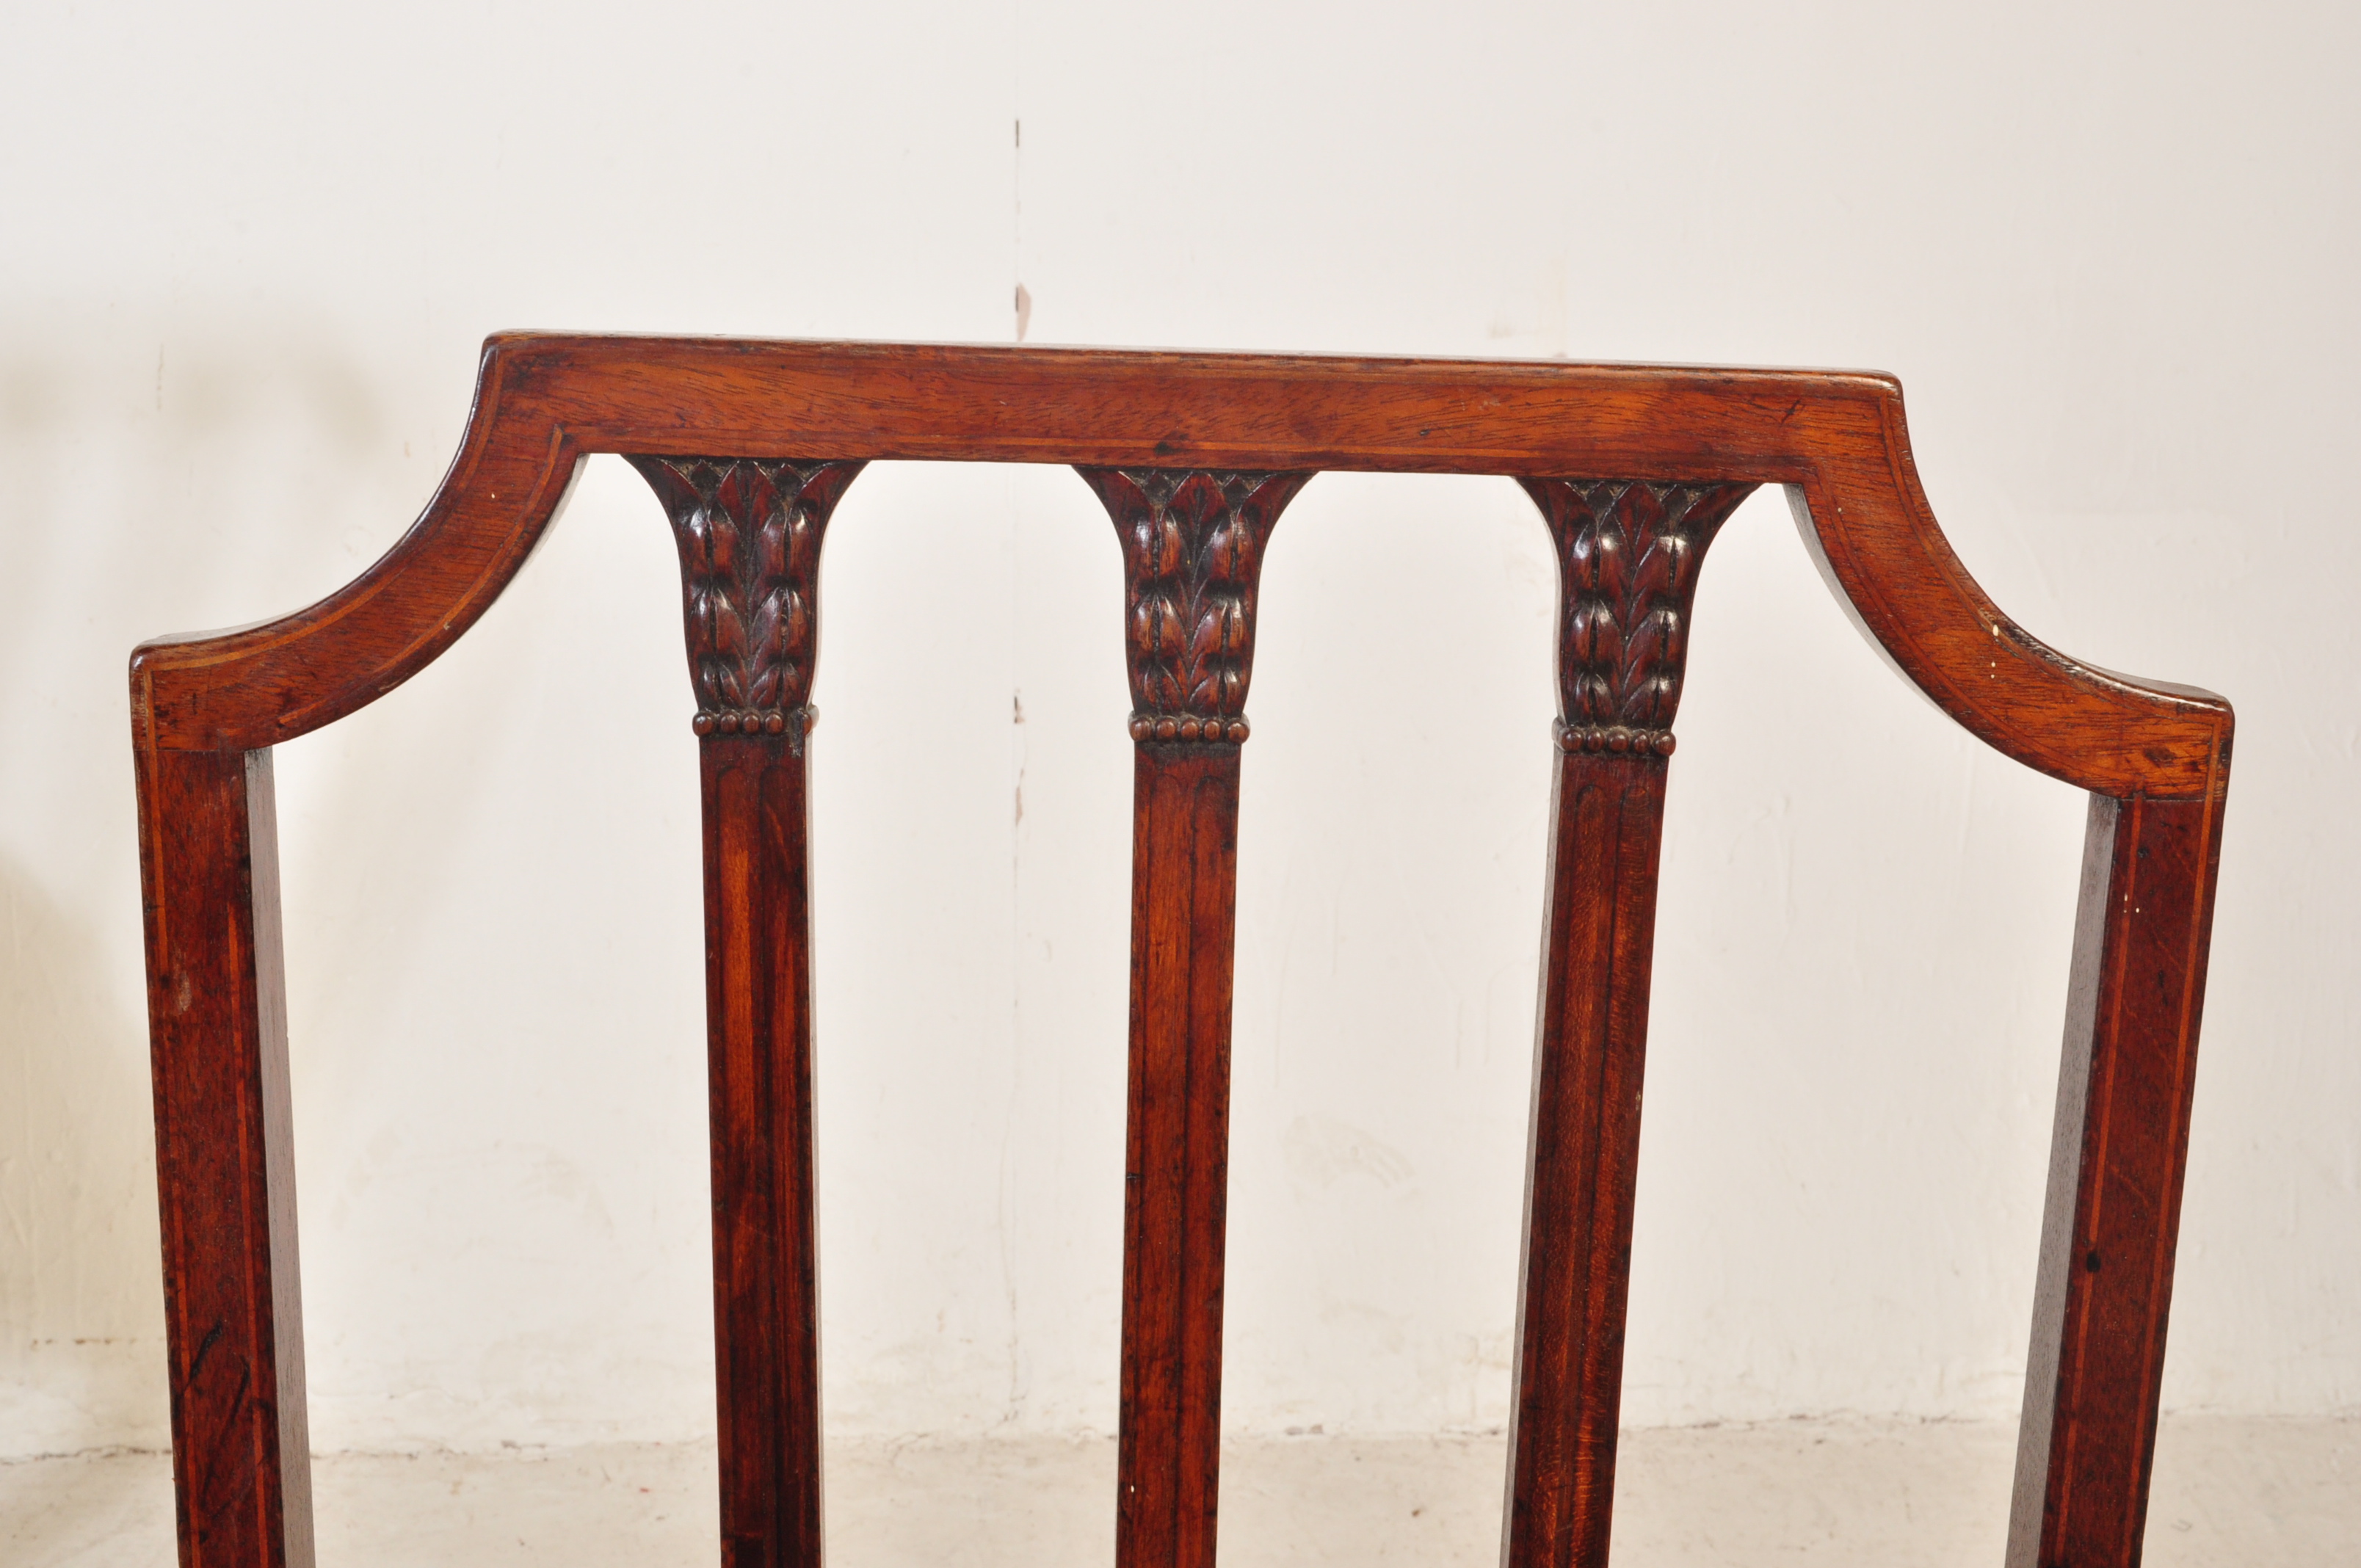 FOUR EDWARDIAN INLAID MAHOGANY DINING CHAIRS - Image 6 of 6